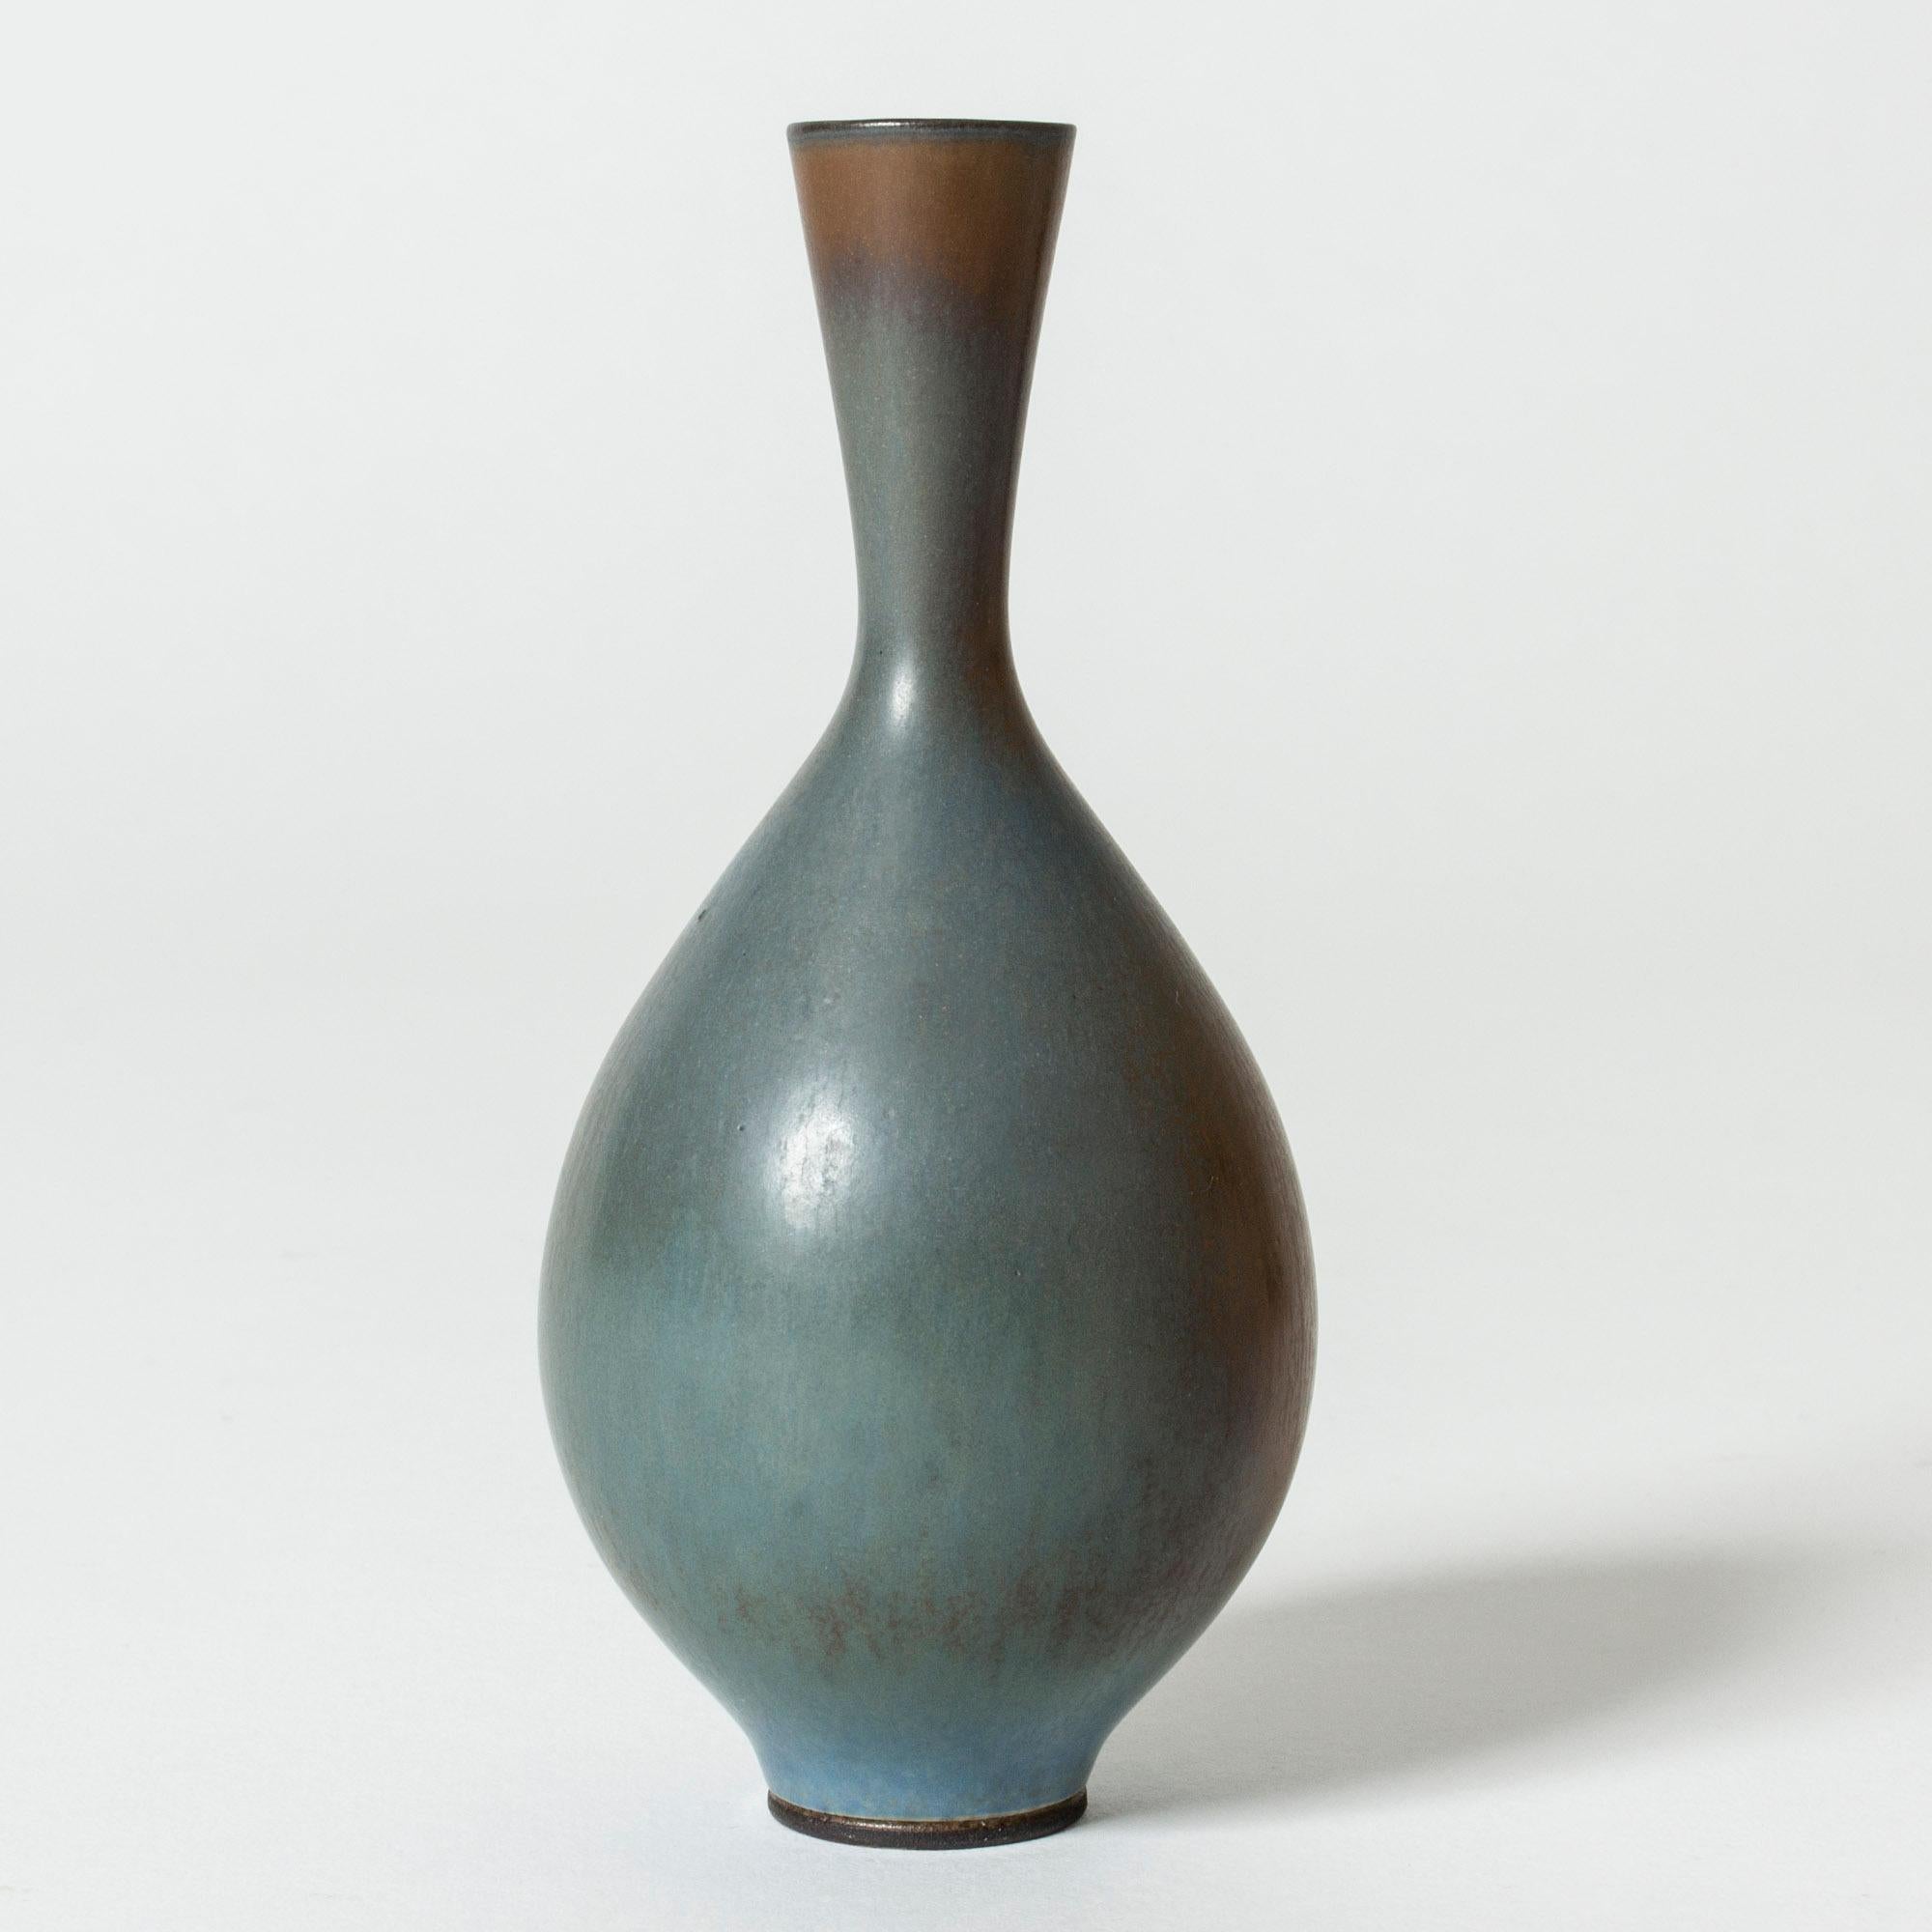 Lovely stoneware vase by Berndt Friberg in a bulbous form. Blue glaze with rust colored fields.

Berndt Friberg was a Swedish ceramicist, renowned for his stoneware vases and vessels for Gustavsberg. His pure, composed designs with satiny,